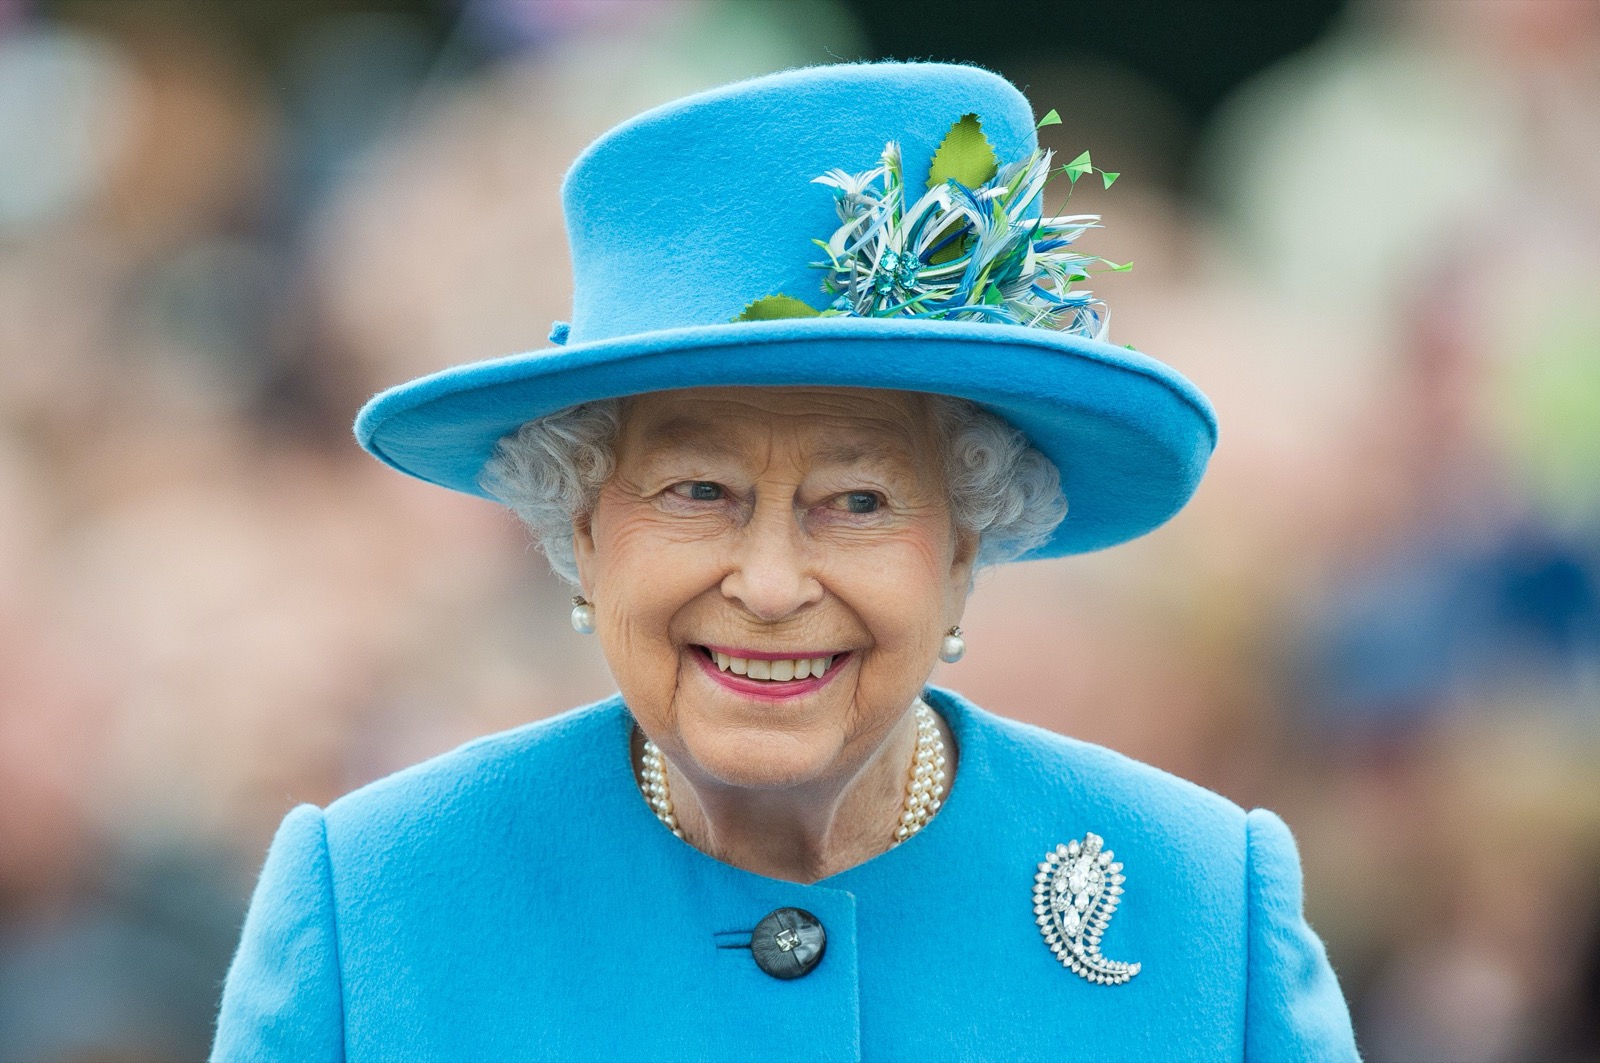 Can You Answer All 20 of These Super Easy Trivia Questions Correctly? Queen Elizabeth II